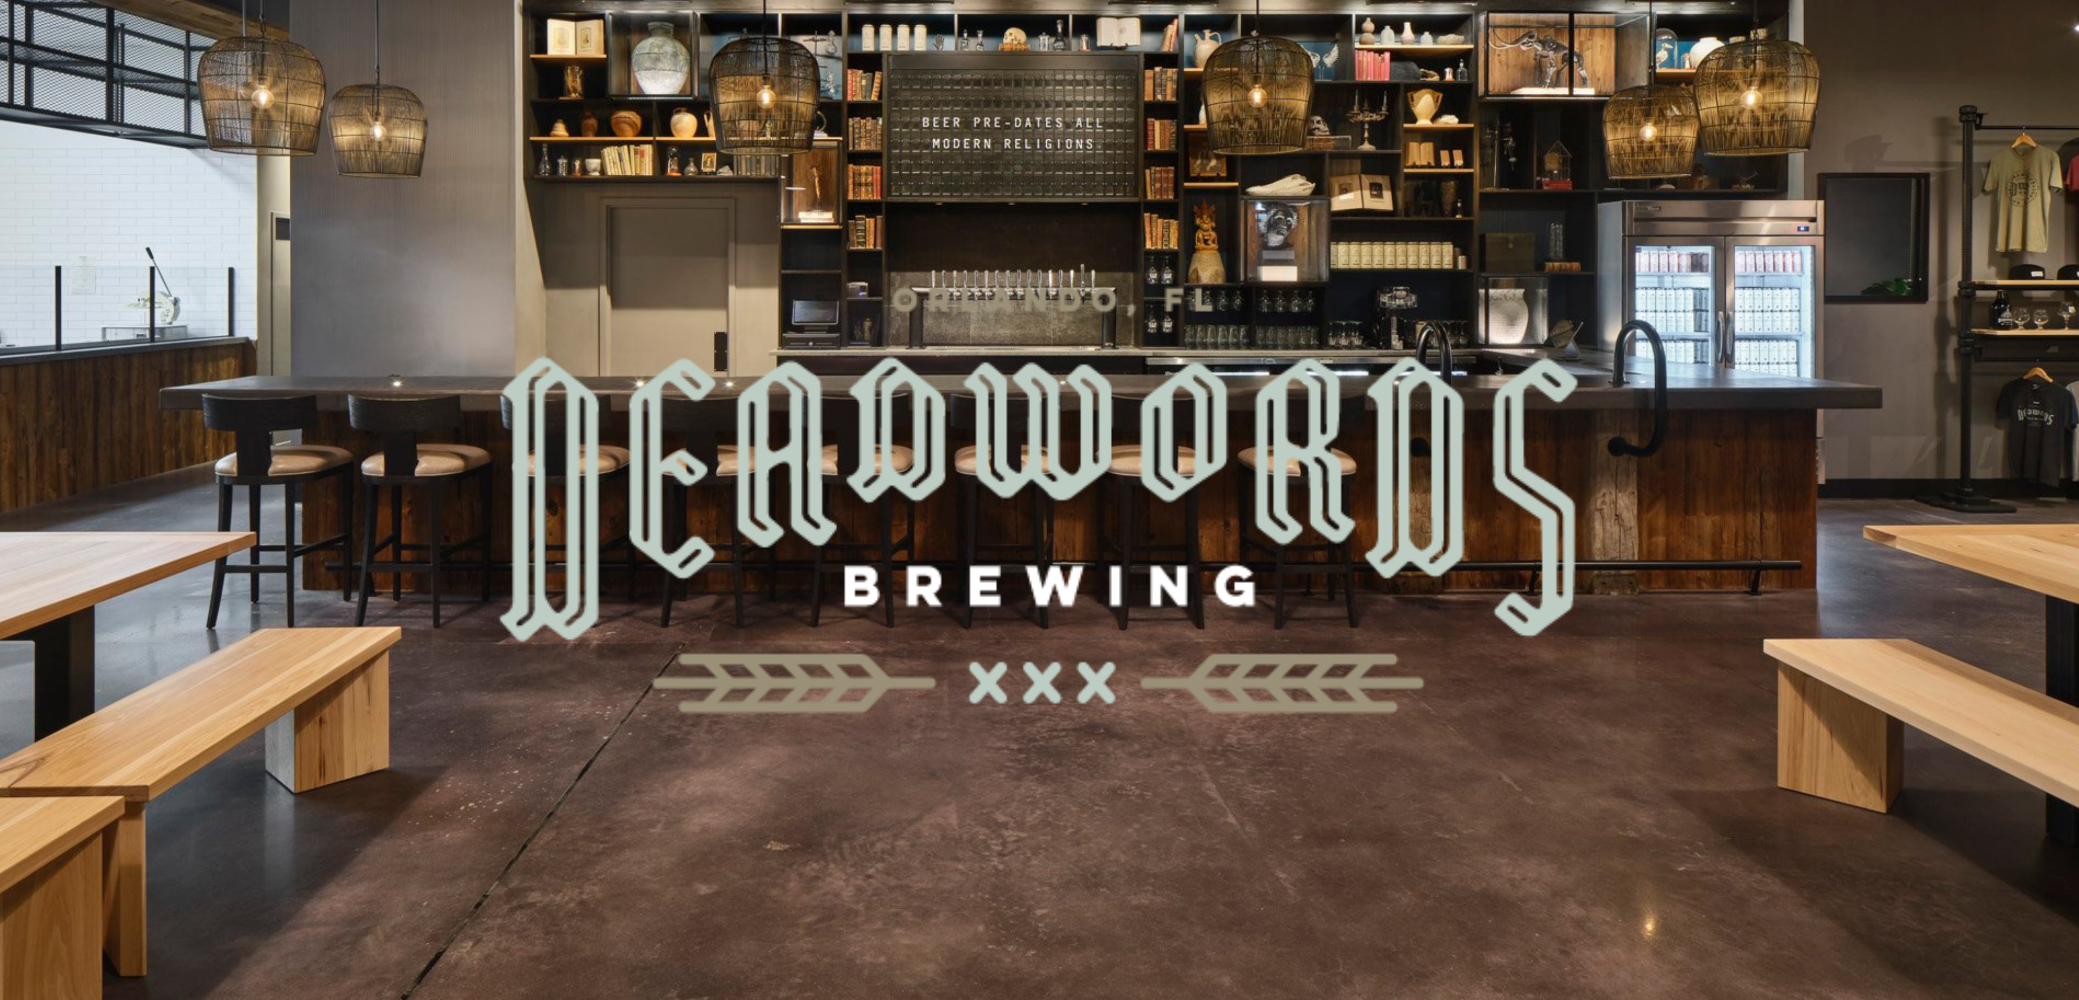 ** Auction Cancelled Due to Turnkey Bankruptcy Sale ** Deadwords Brewing Co: Available Turnkey Prior to Auction: PKW 15 BBL Microbrewery